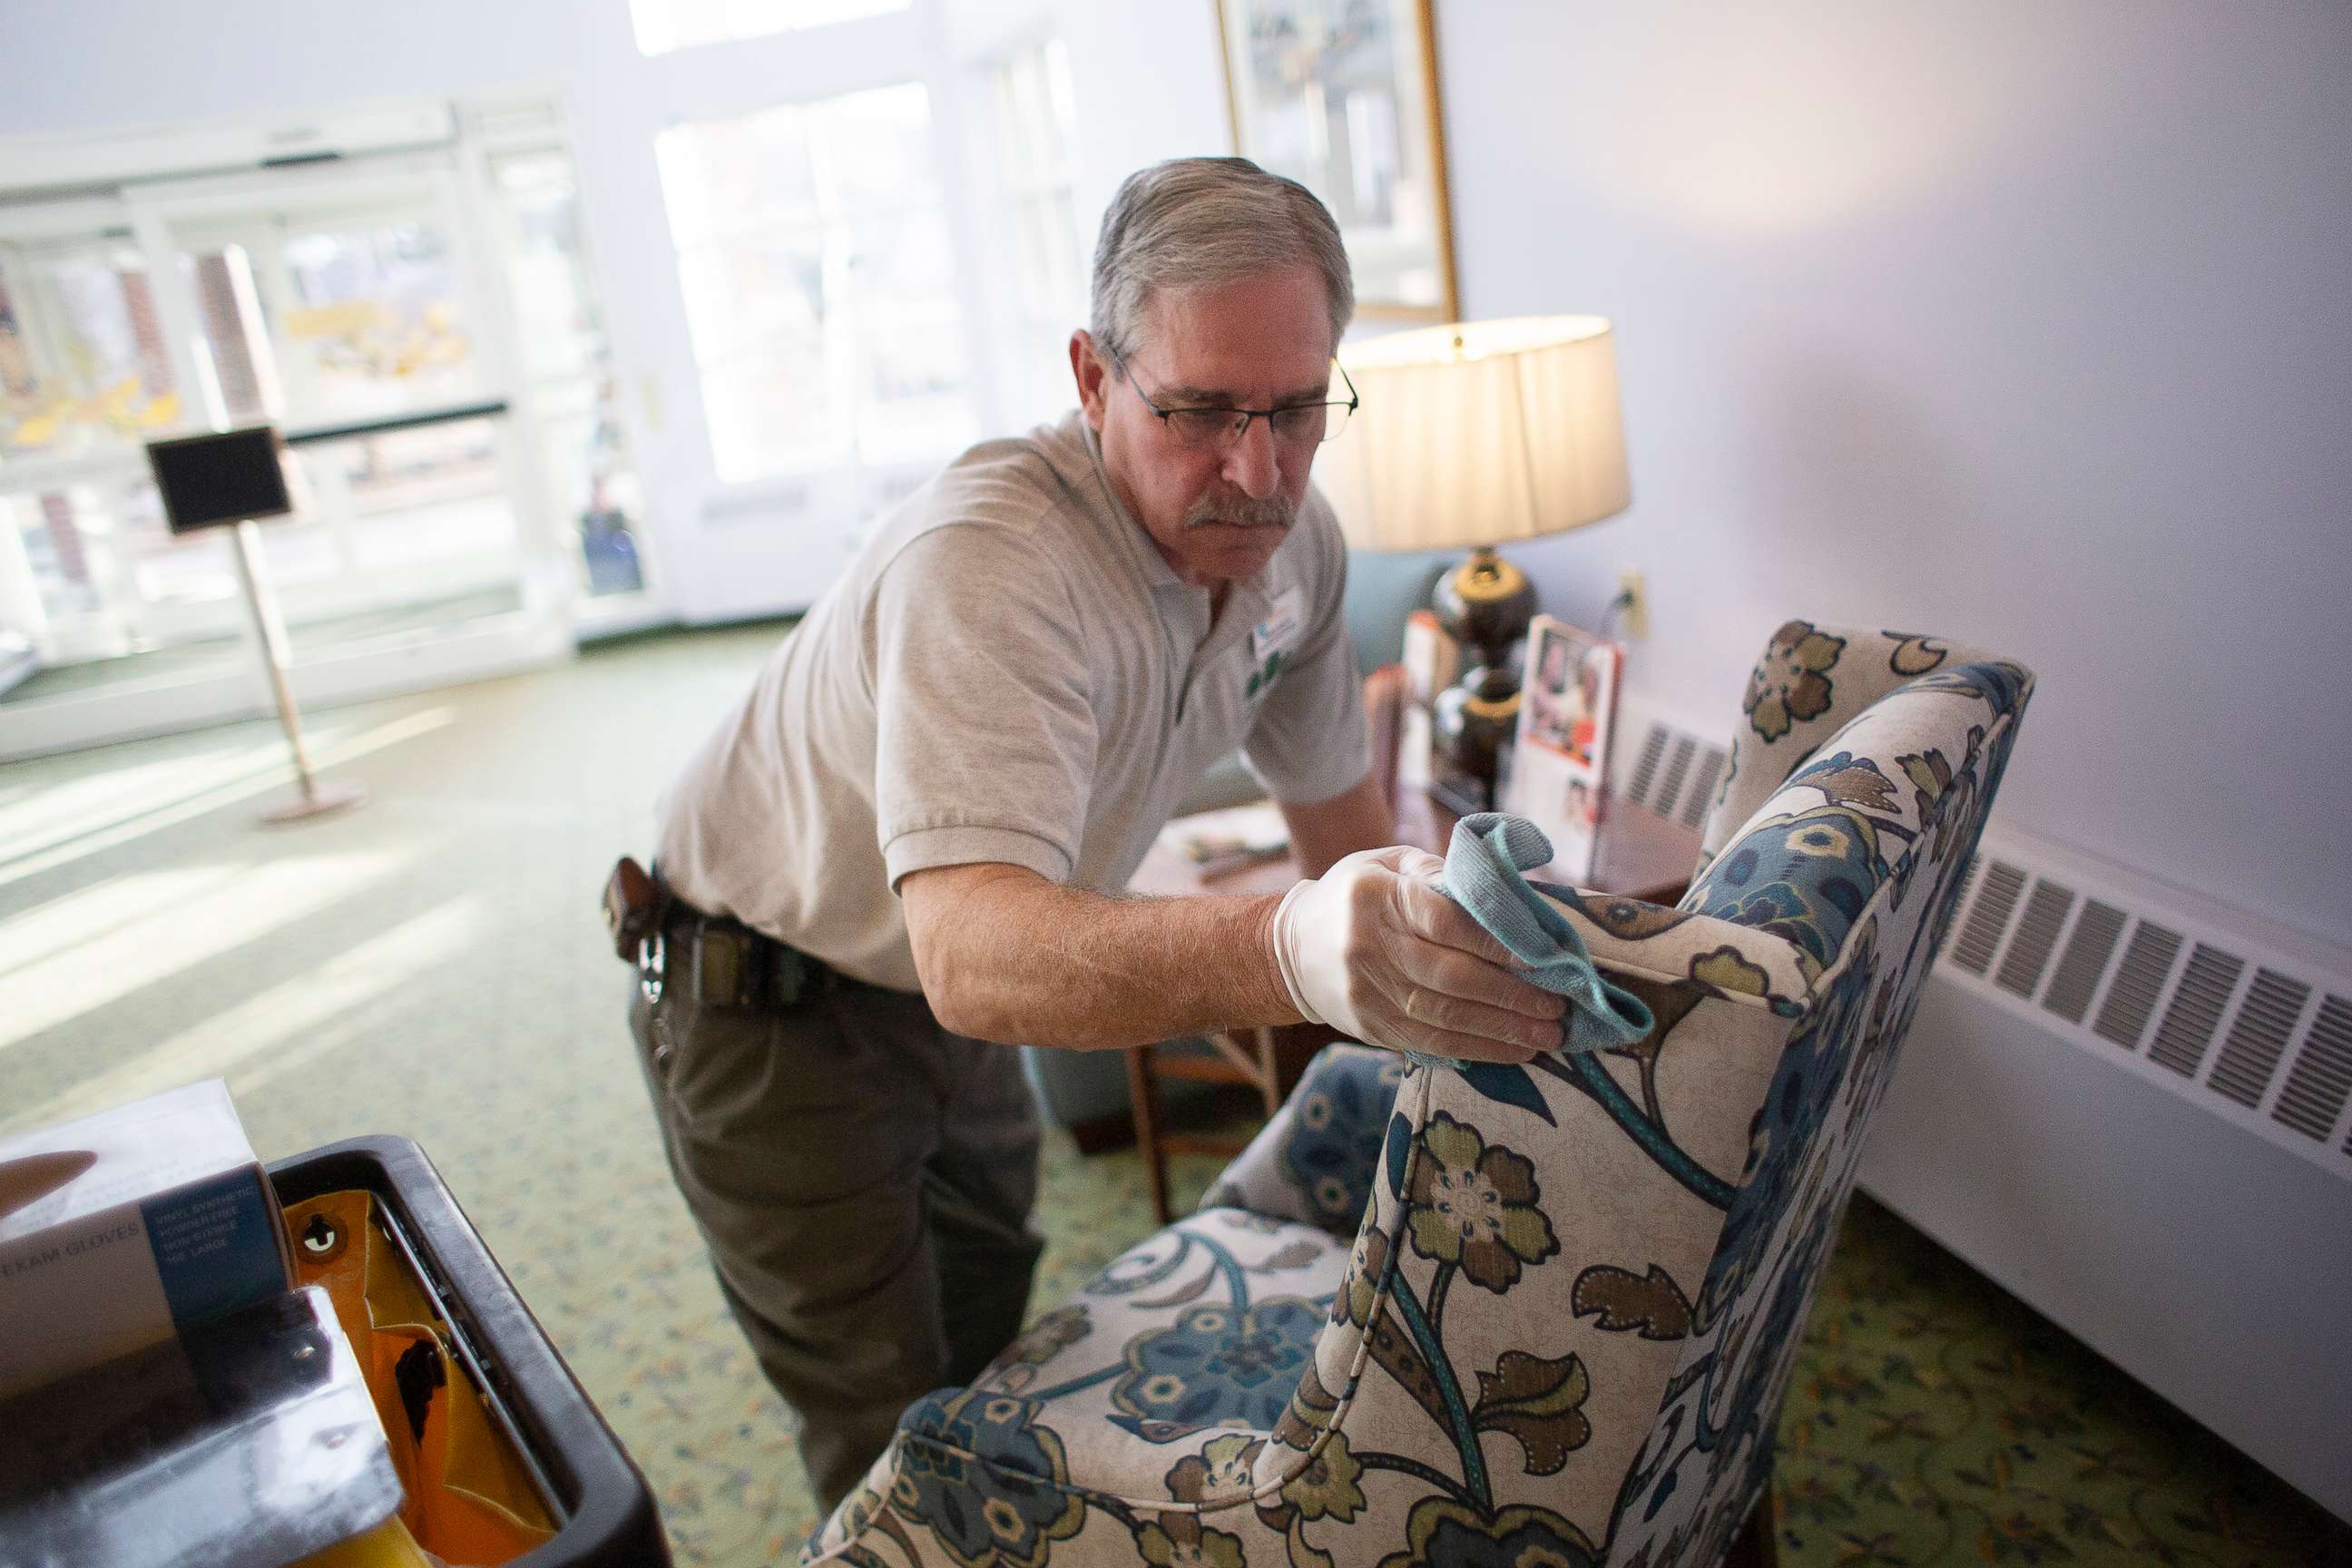 PHOTO: A man uses disinfecting spray to clean surfaces at The Cedars Hoffman Center nursing home in Portland, Maine, March 12, 2020.